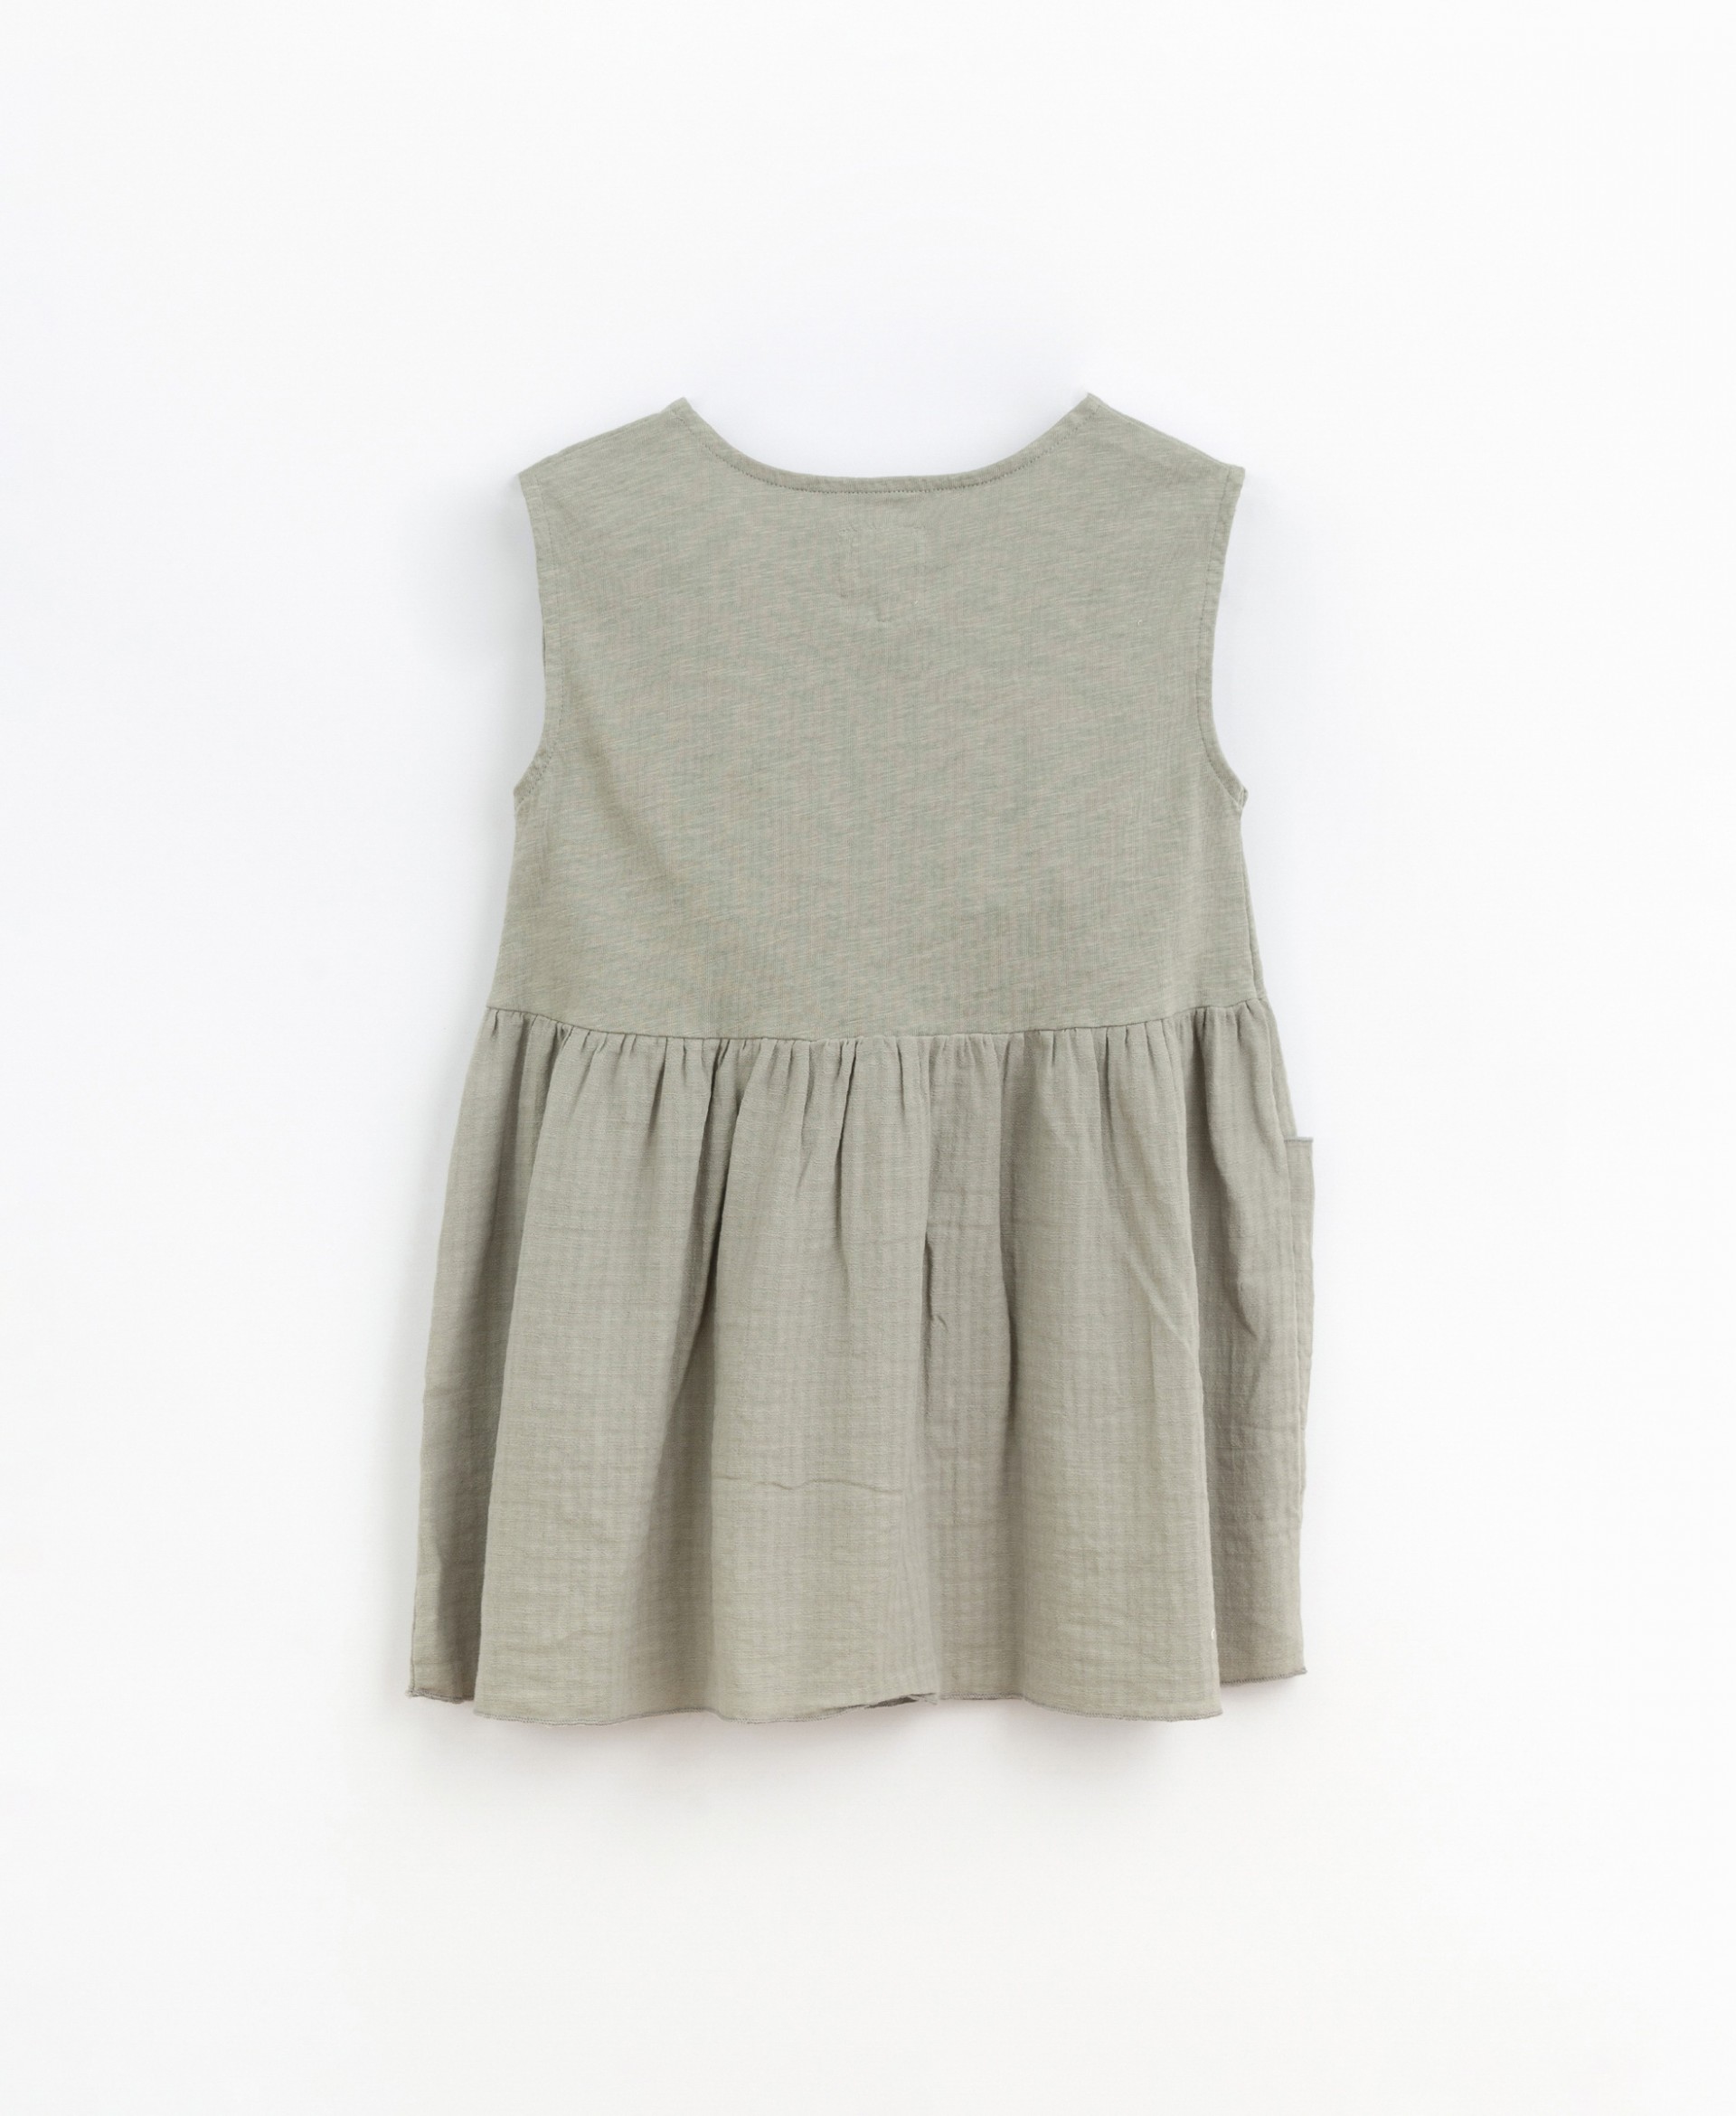 Dress with pockets | Basketry